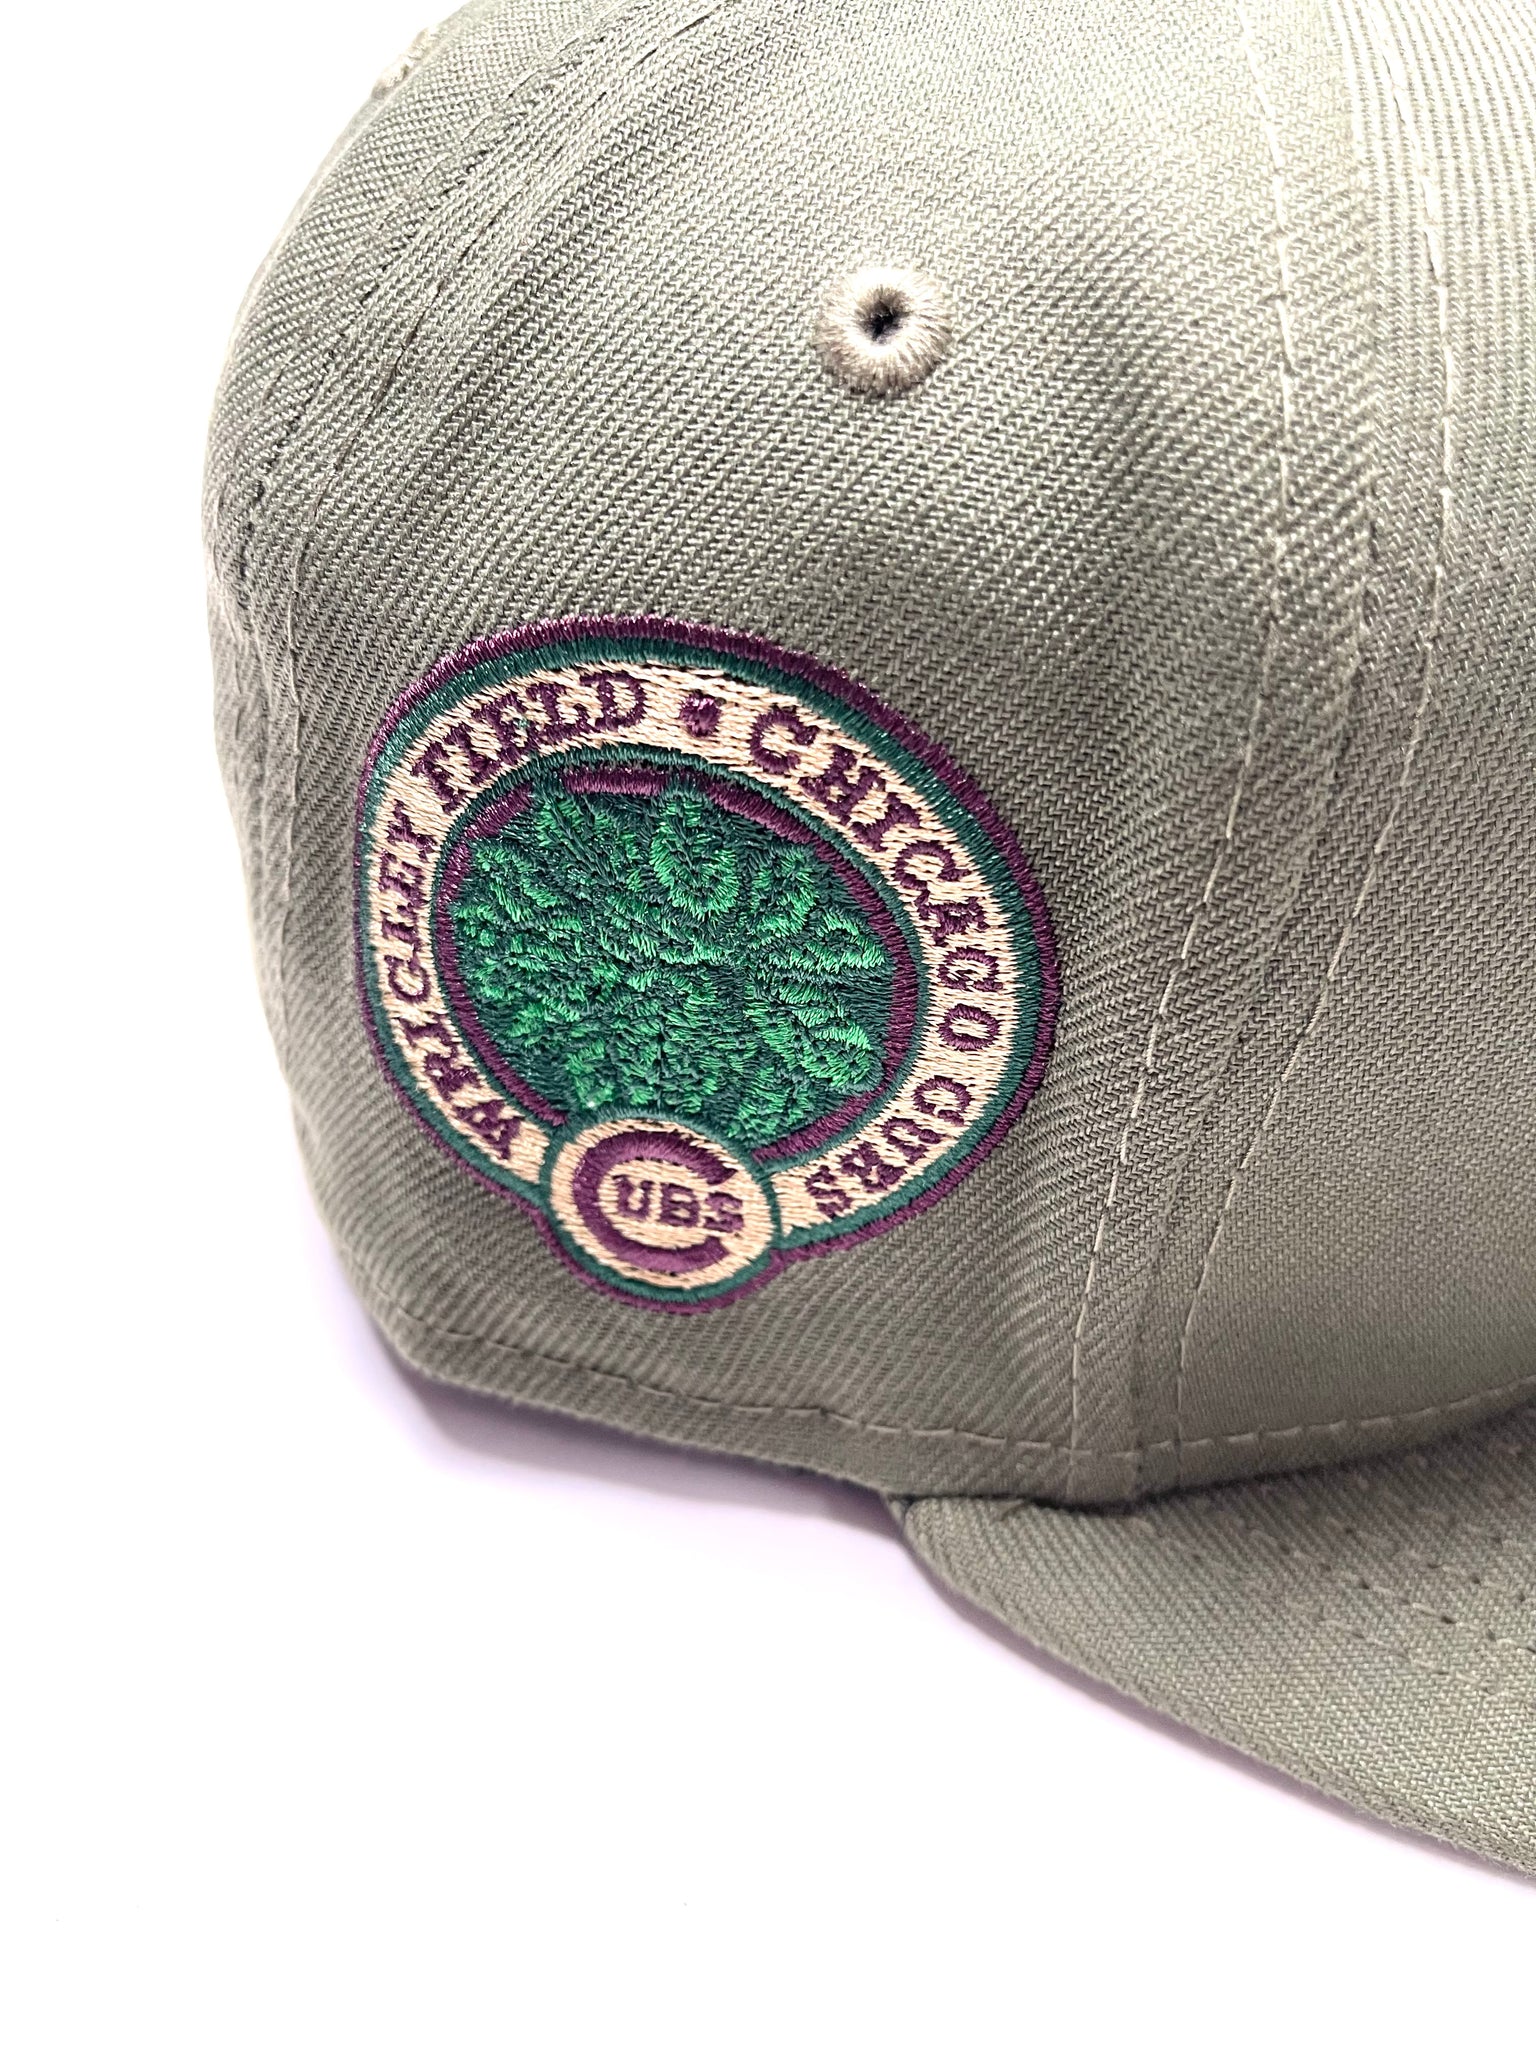 NEW ERA “WINE COUNTRY” CHICAGO CUBS FITTED HAT (OLIVE GREEN/MAROON